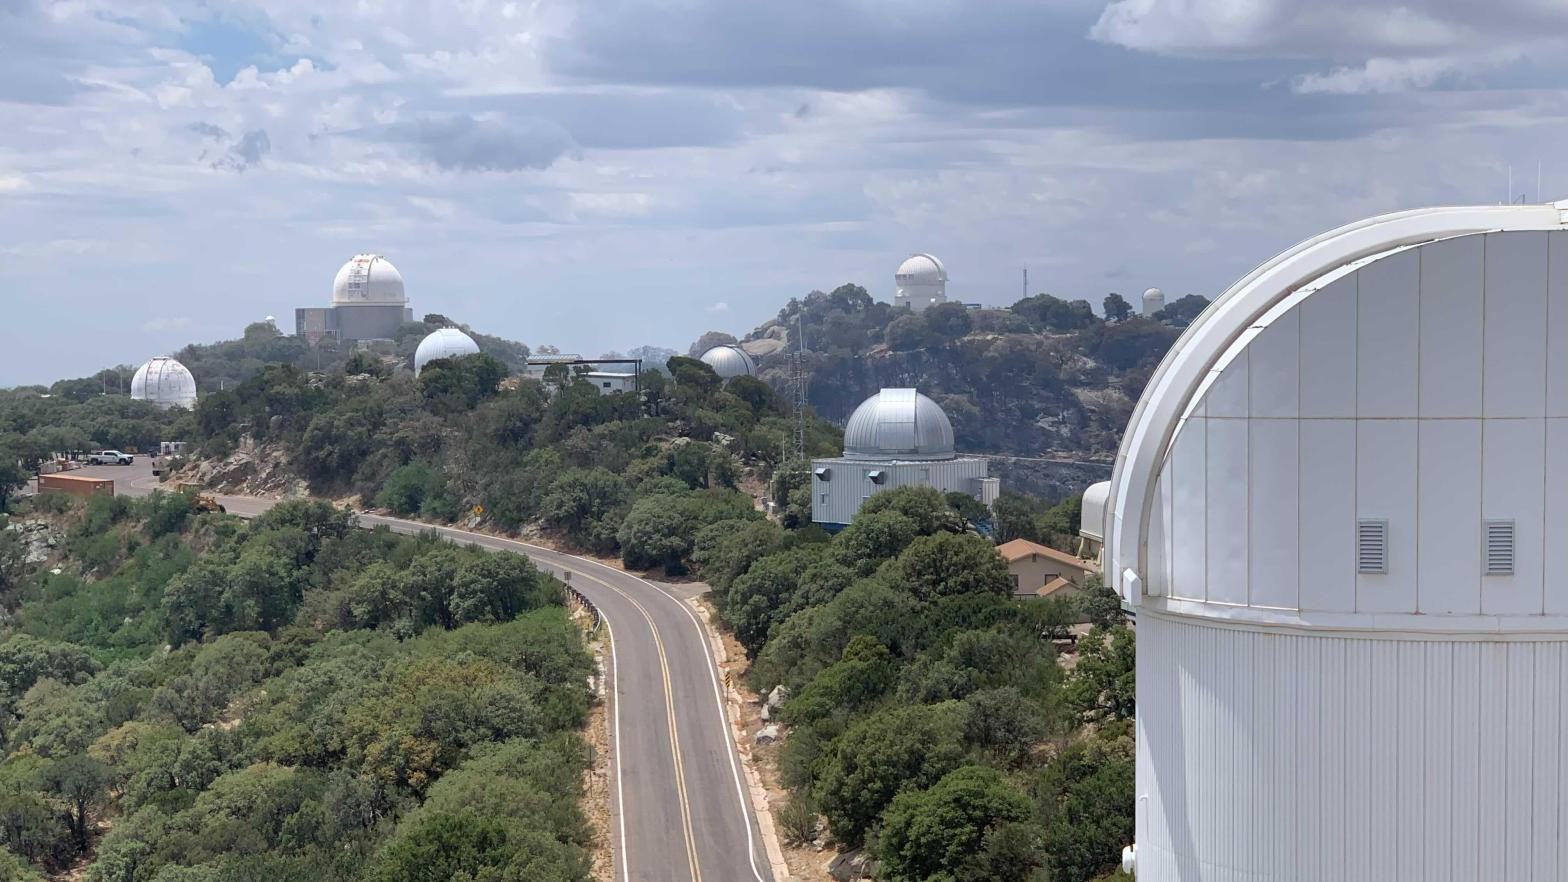 In this image taken June 18, Kitt Peak's telescopes appear to have been spared the worst of the wildfire. (Image: KPNO/NOIRLab/NSF/AURA)